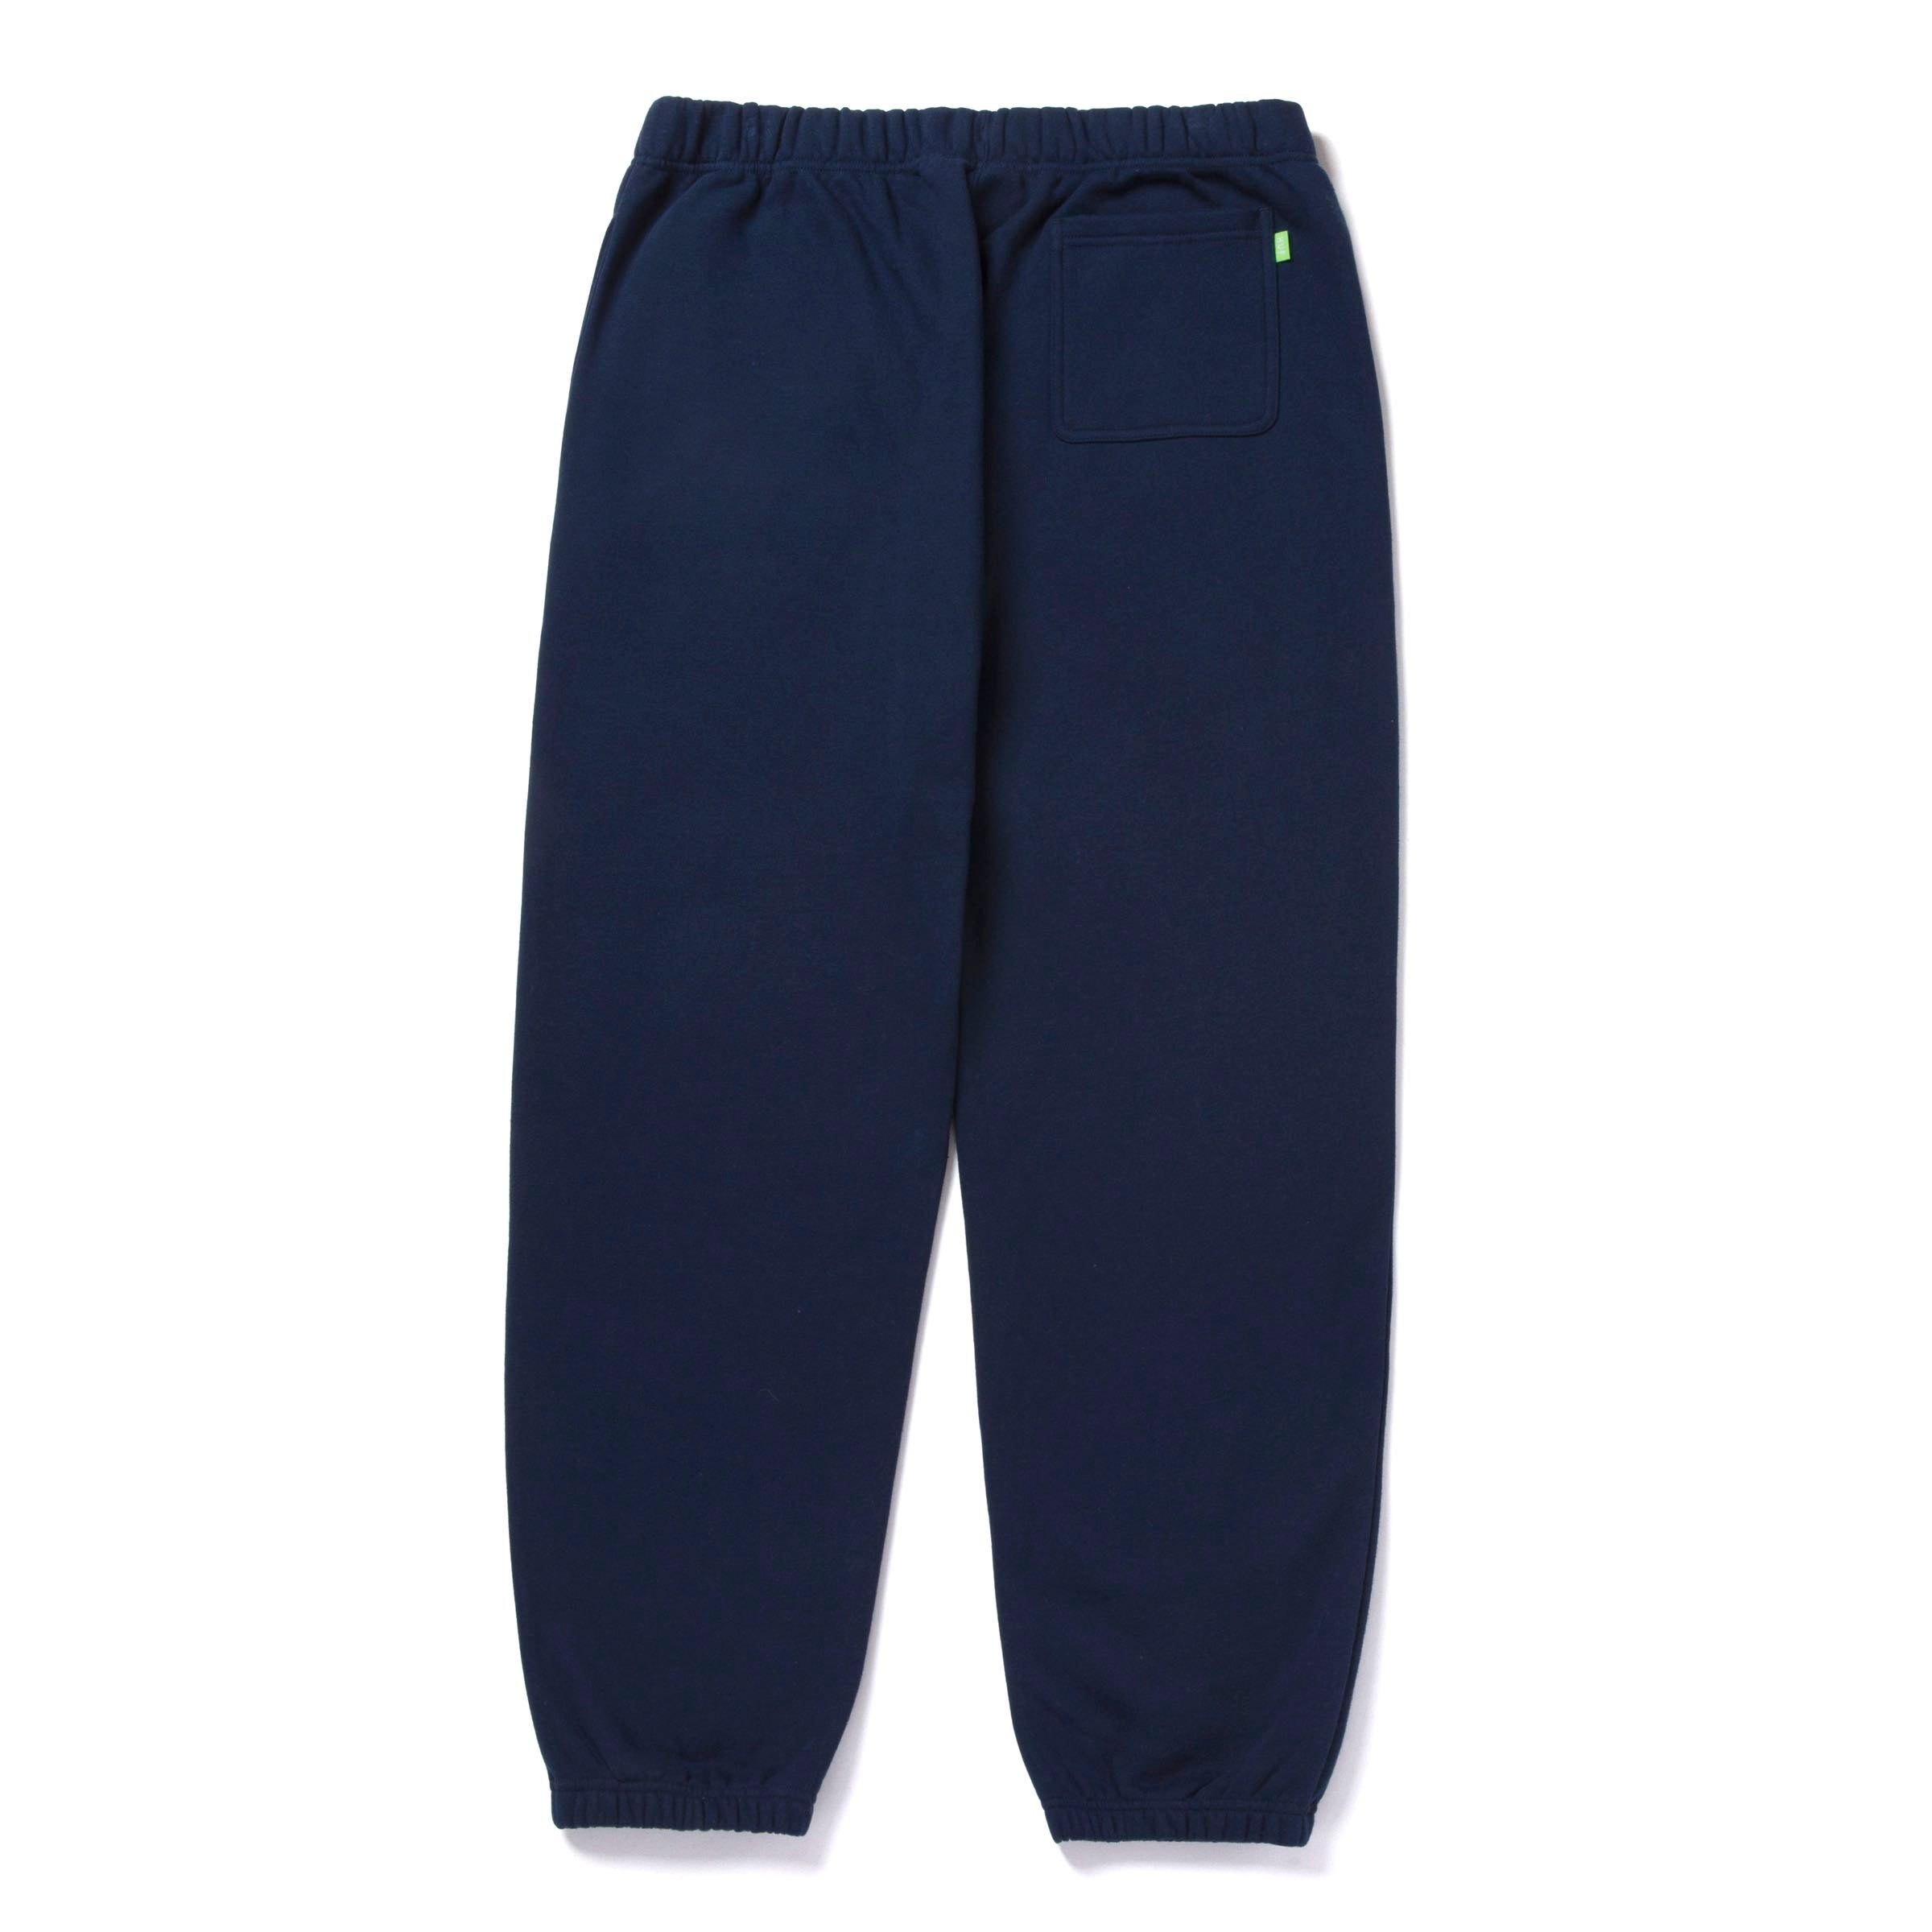 Louis Vuitton Mens Joggers & Sweatpants, Navy, XL*Stock Confirmation Required